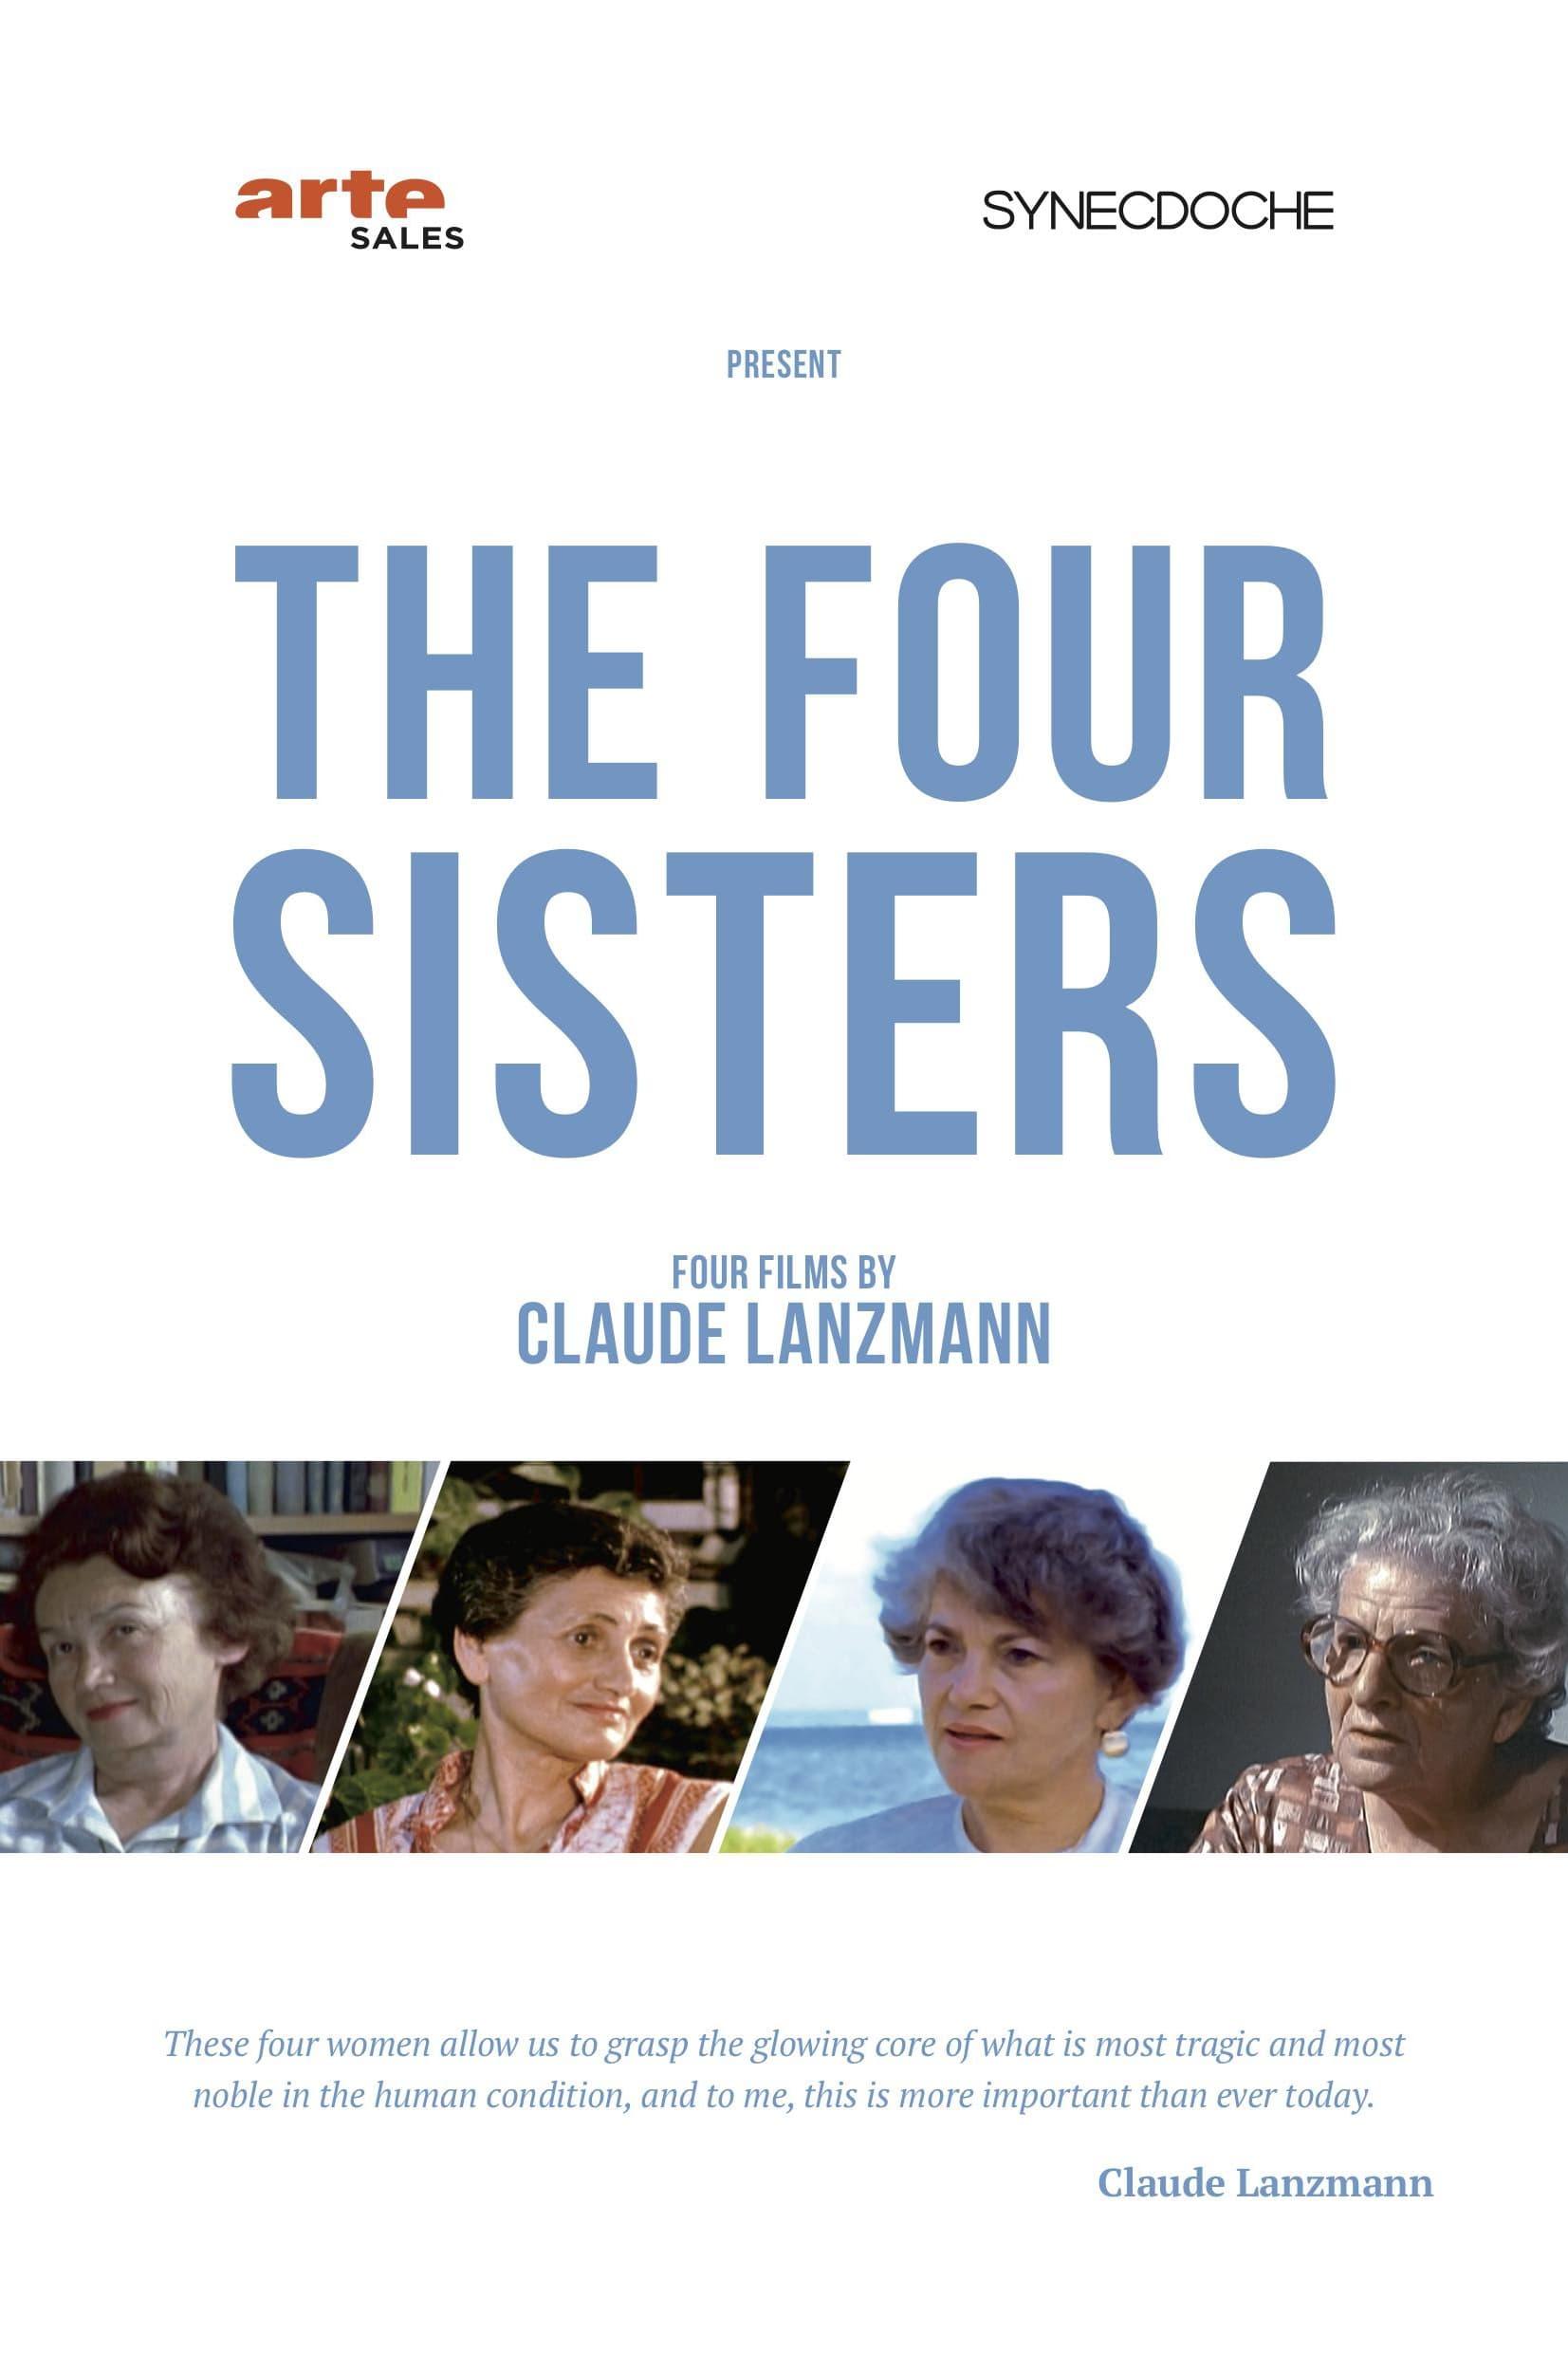 Shoah: Four Sisters poster